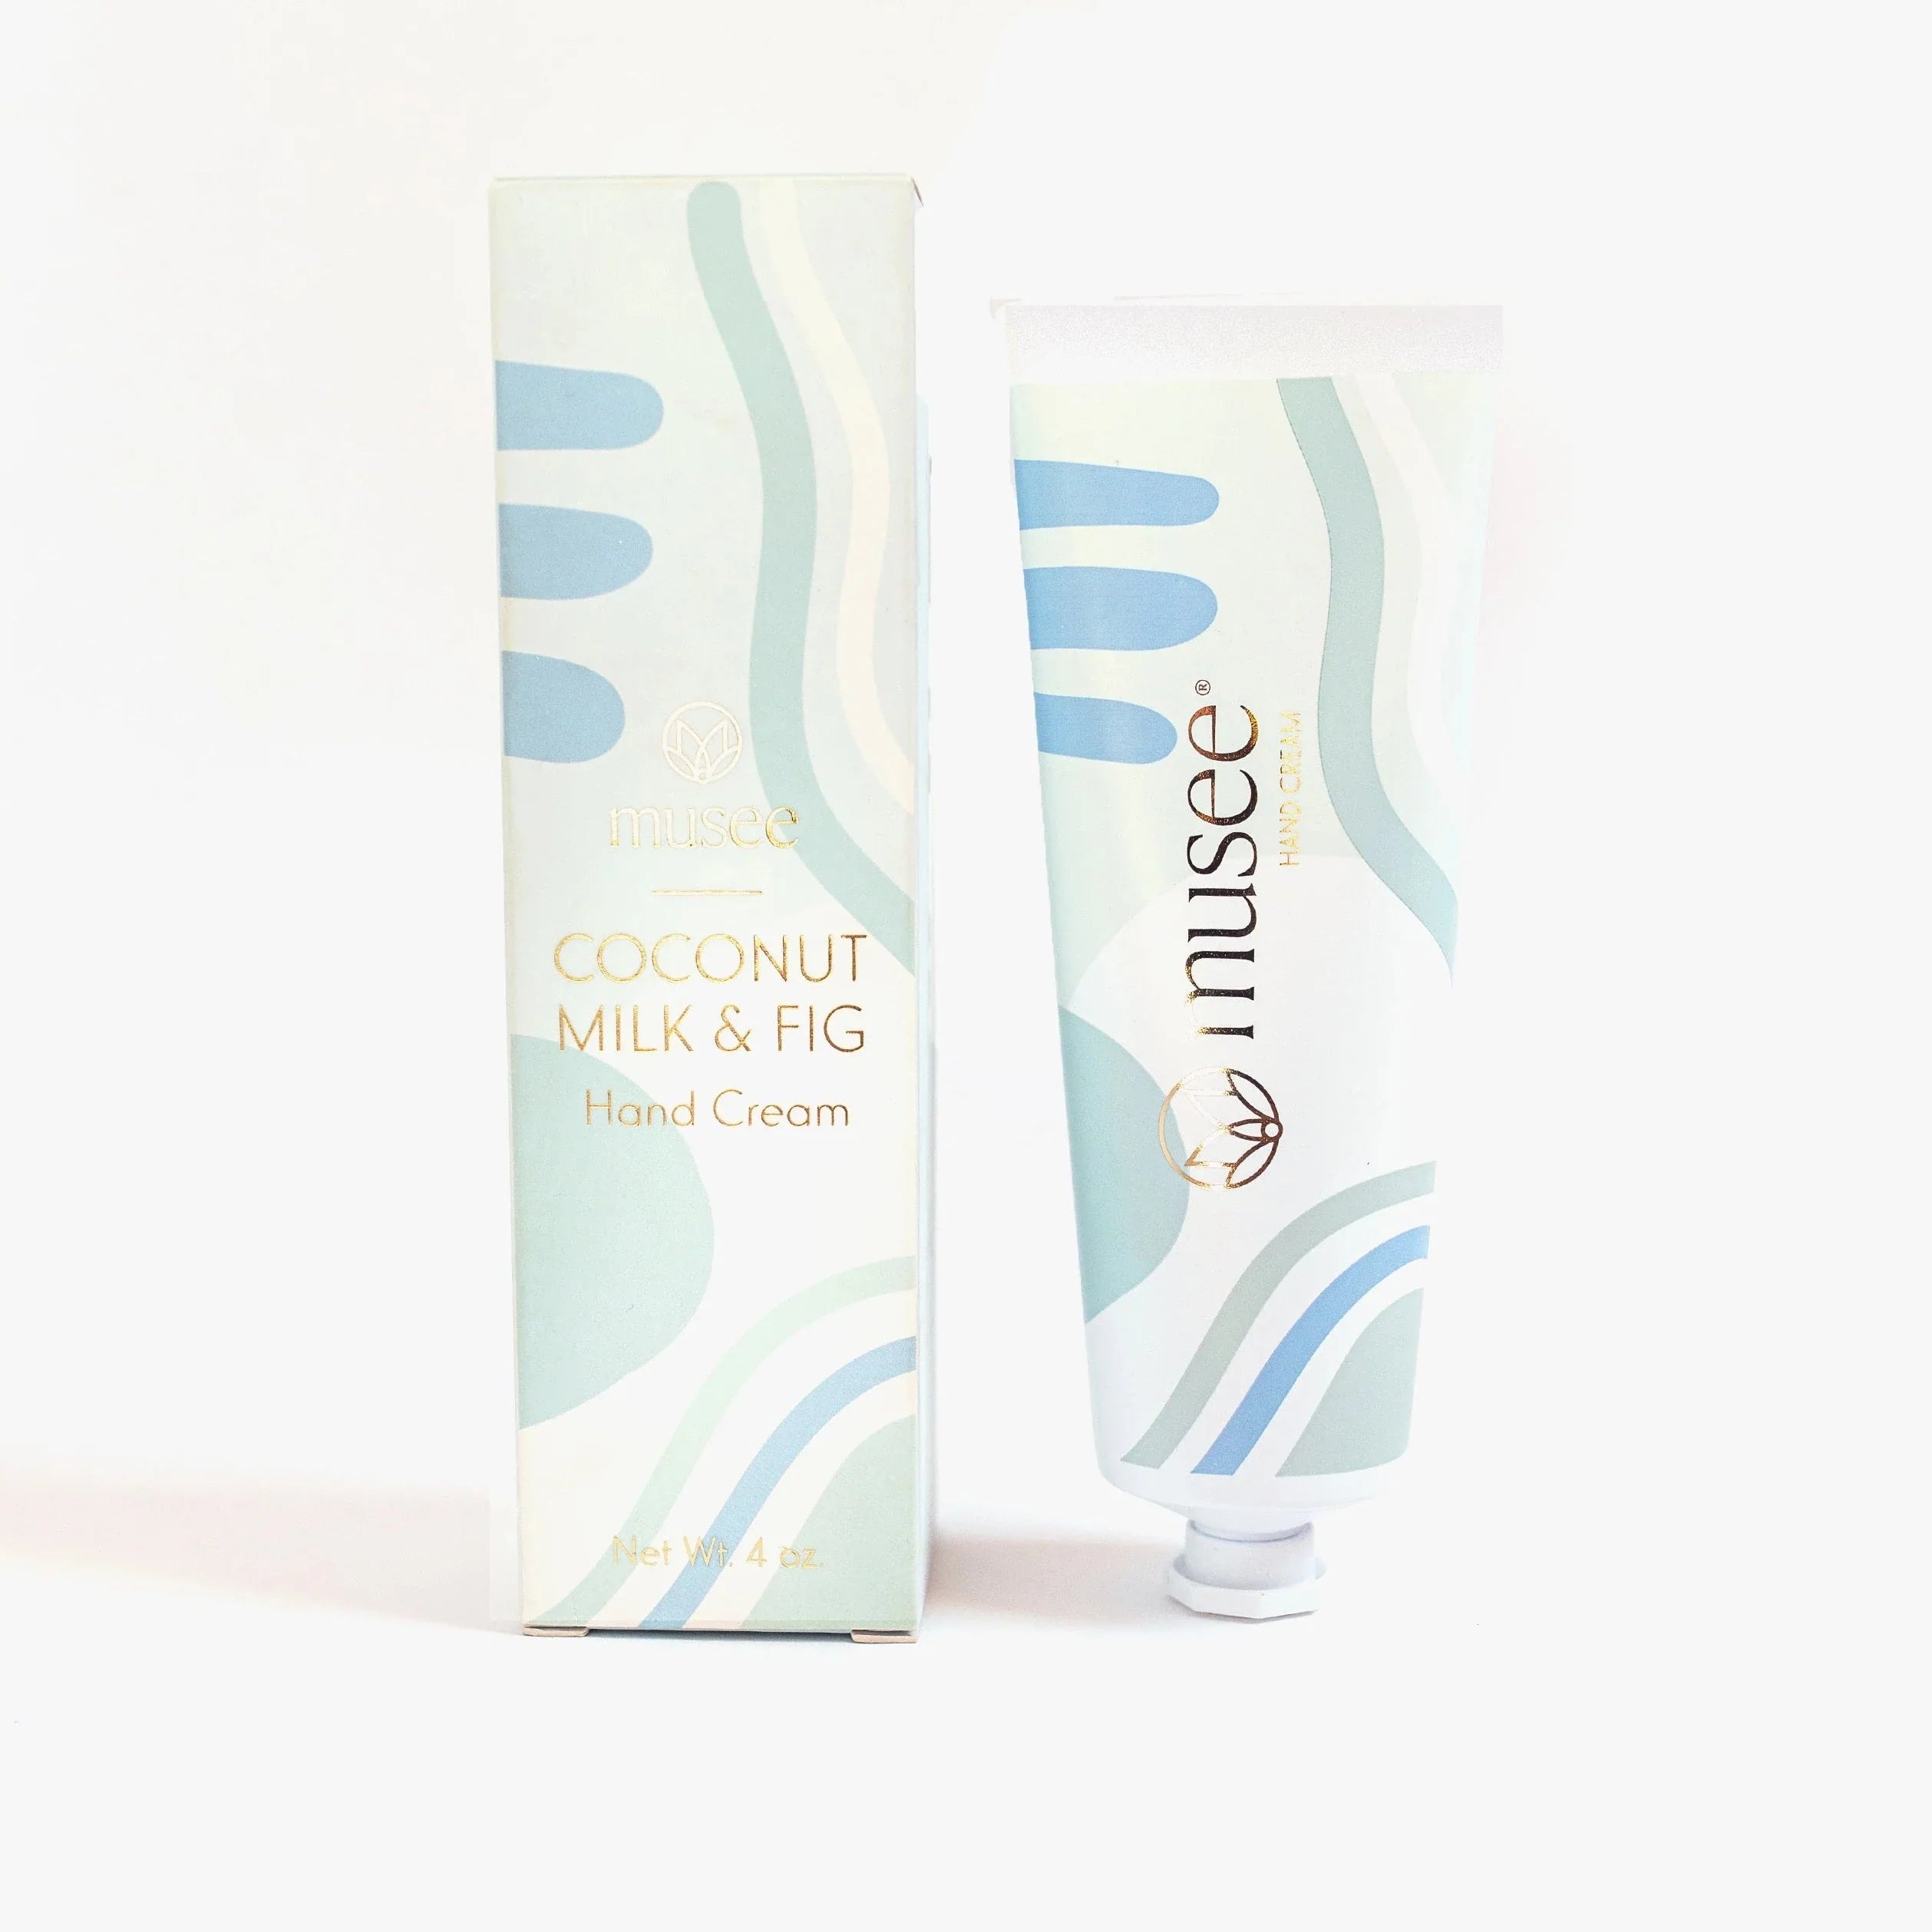 light green and blue abstract pattern on both the container and packaging of the coconut milk & fig hand cream. box is to the left of the tube for the hand cream